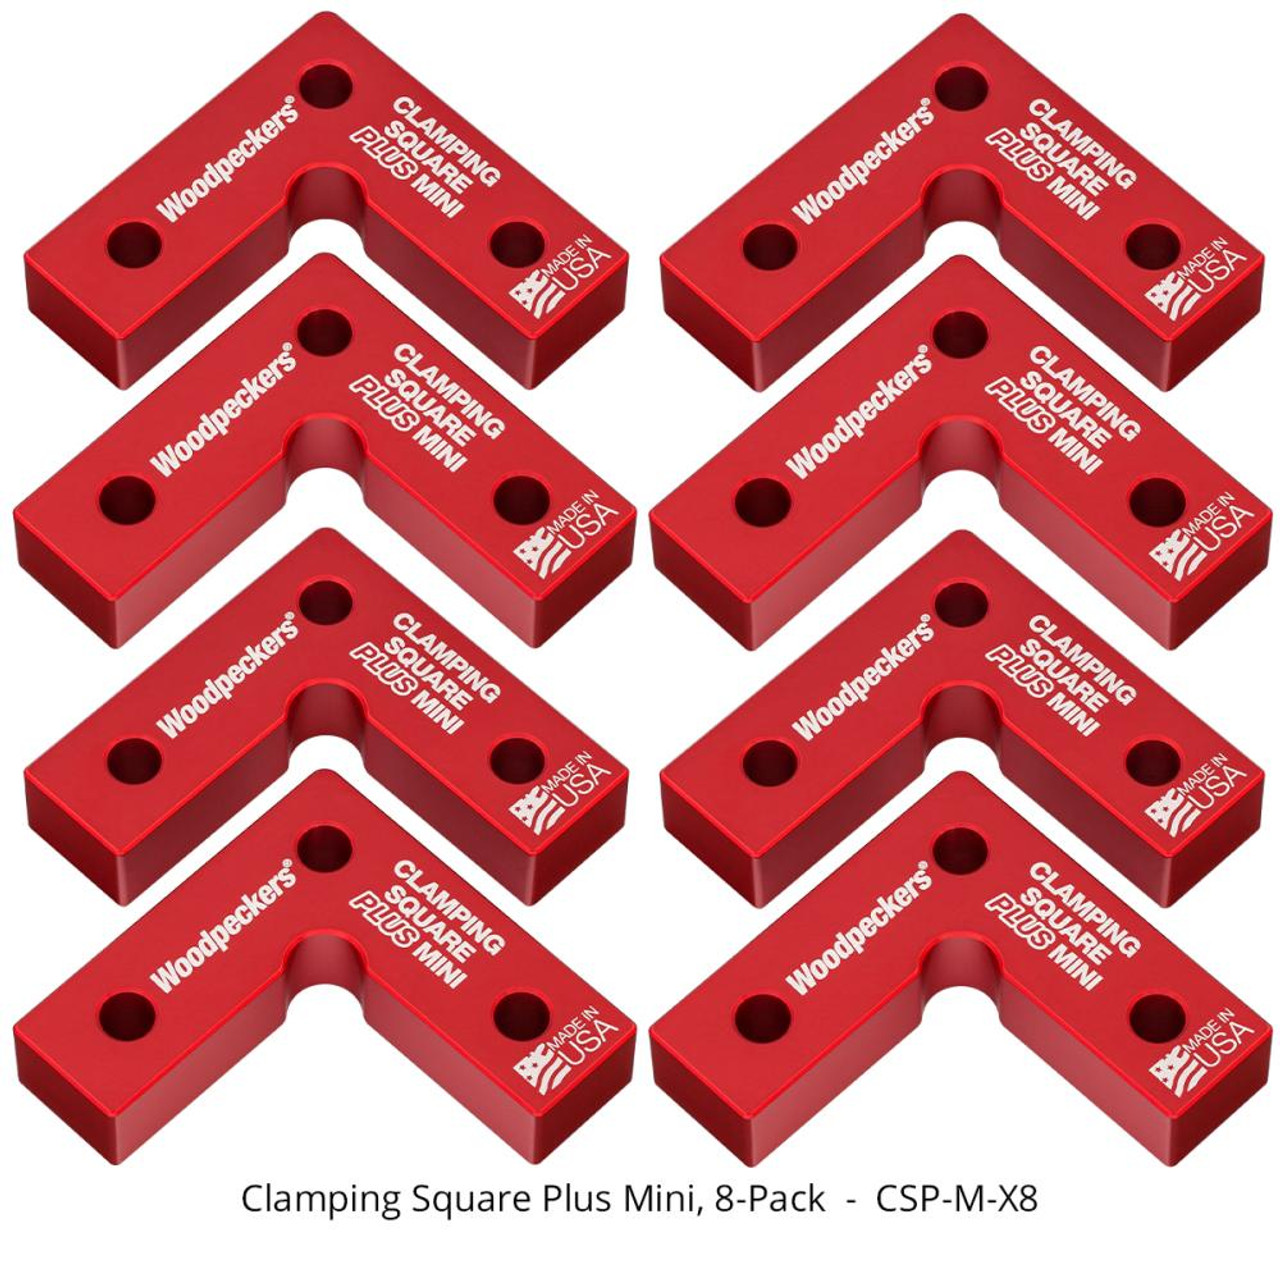 Clamping Square PLUS Clamp - 4 pairs of clamps + 4 Individual Clamping  Square Plus